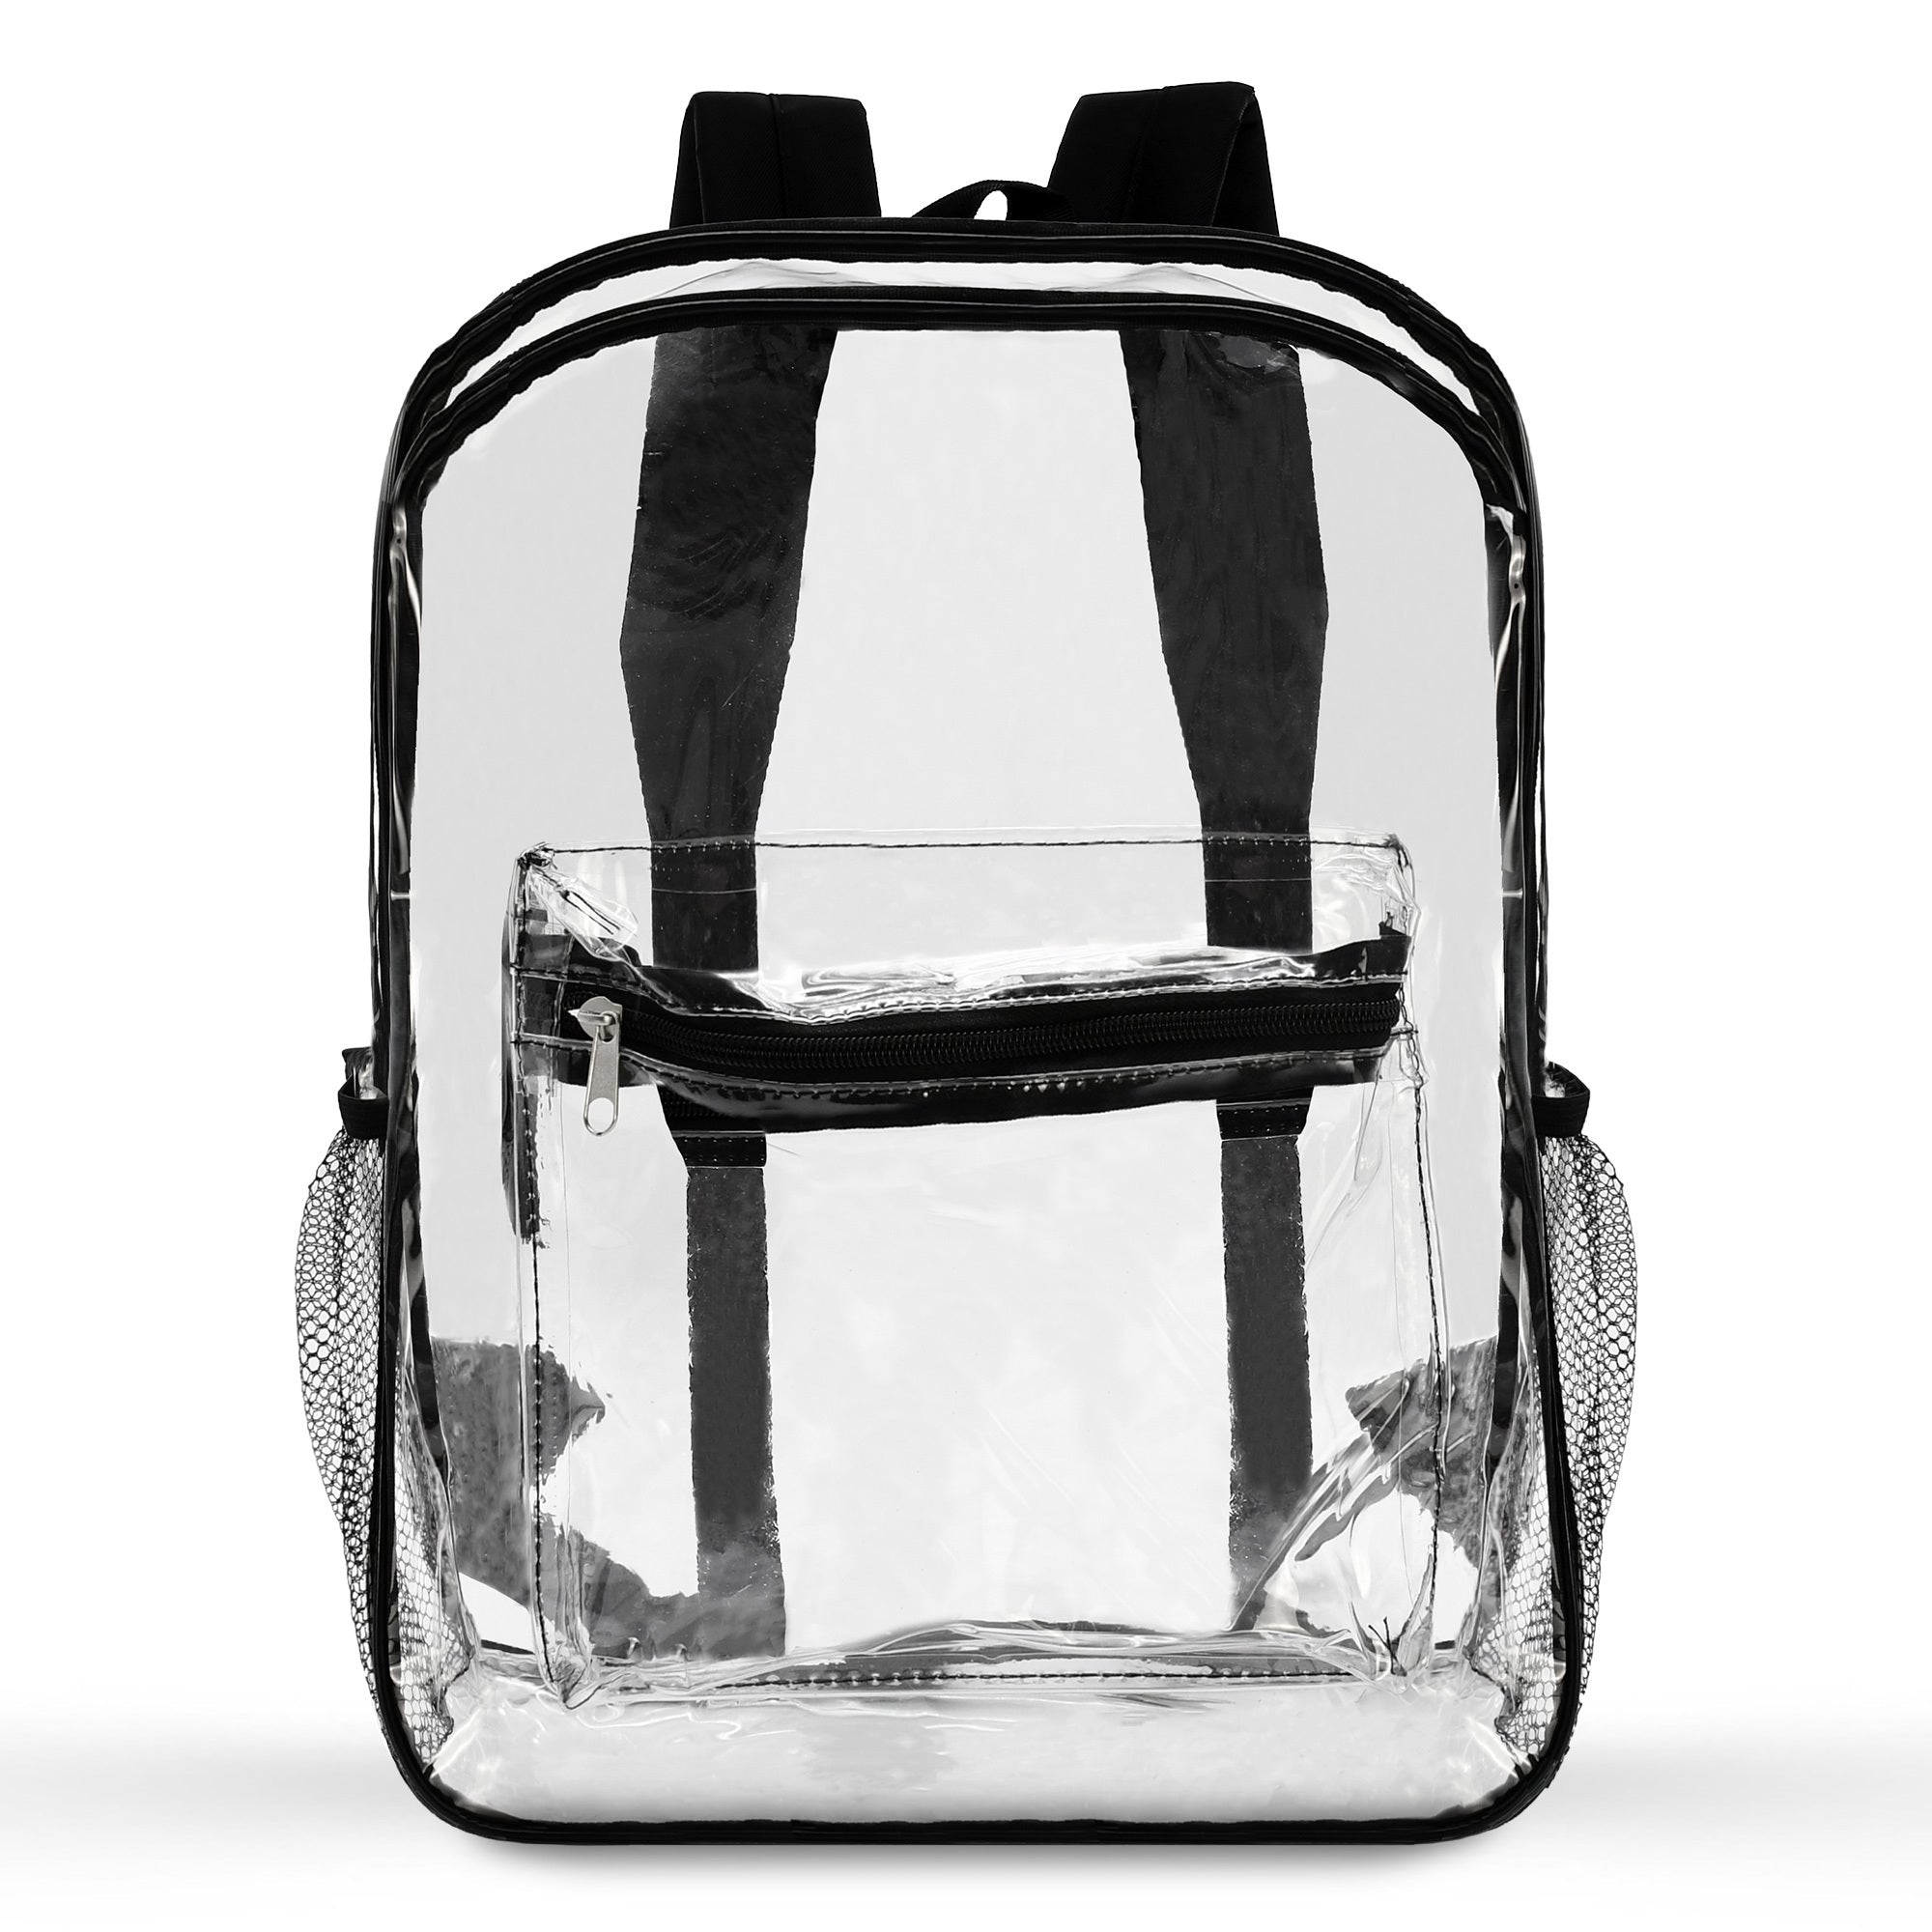 Clear Backpack Stadium Approved 15 x 11 x 5, Small and Transparent Backpack for Sports Event and Concerts